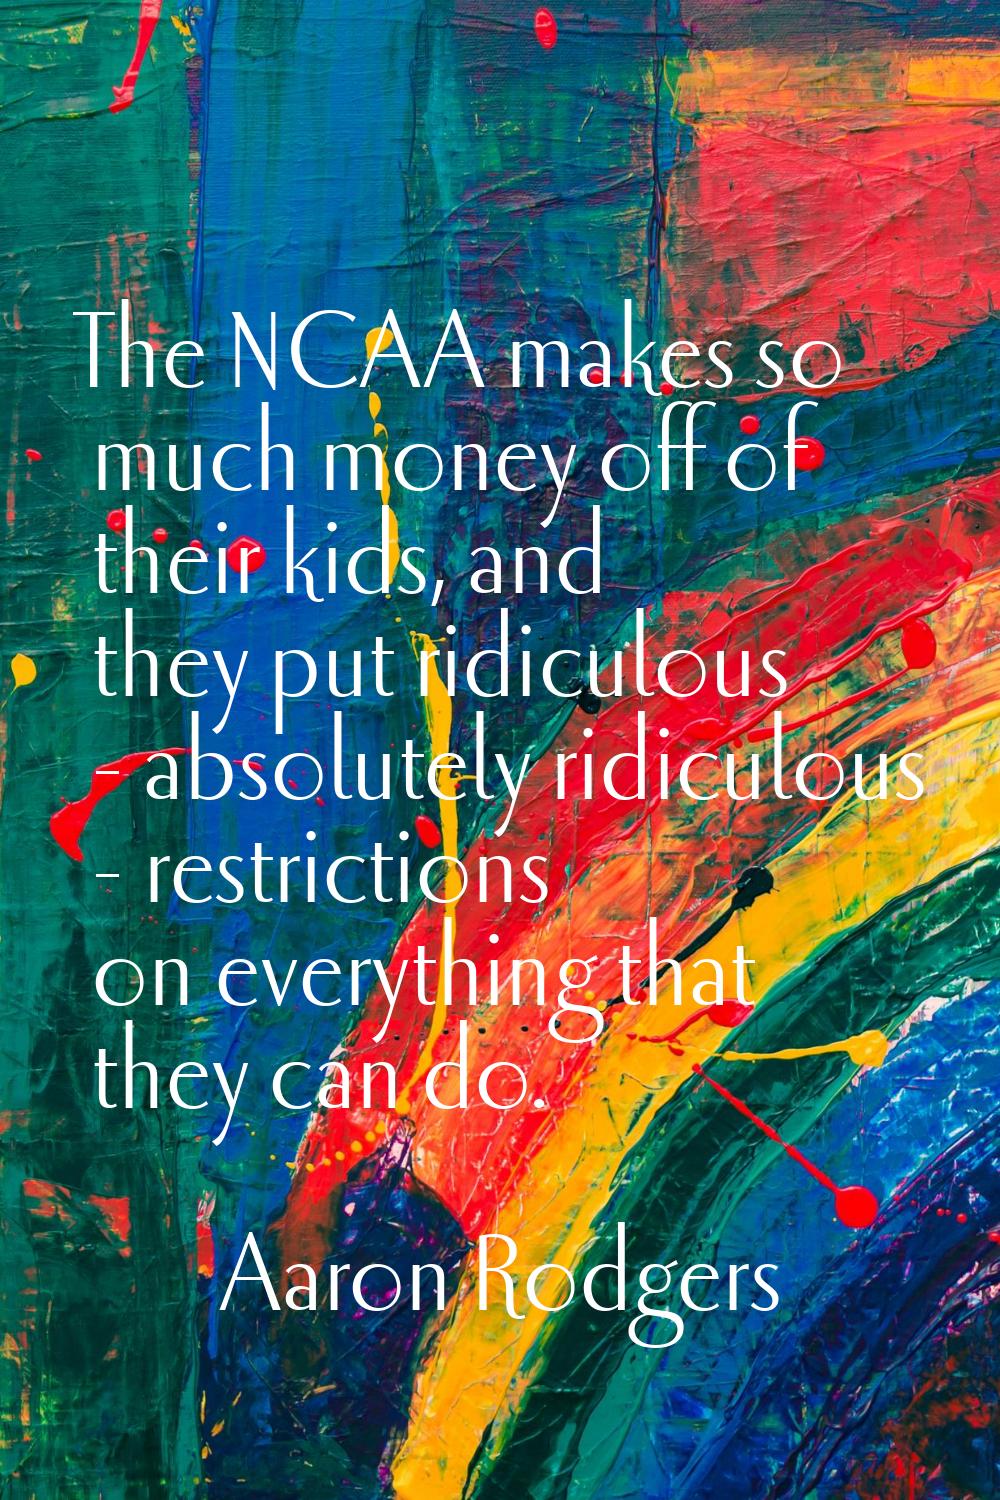 The NCAA makes so much money off of their kids, and they put ridiculous - absolutely ridiculous - r